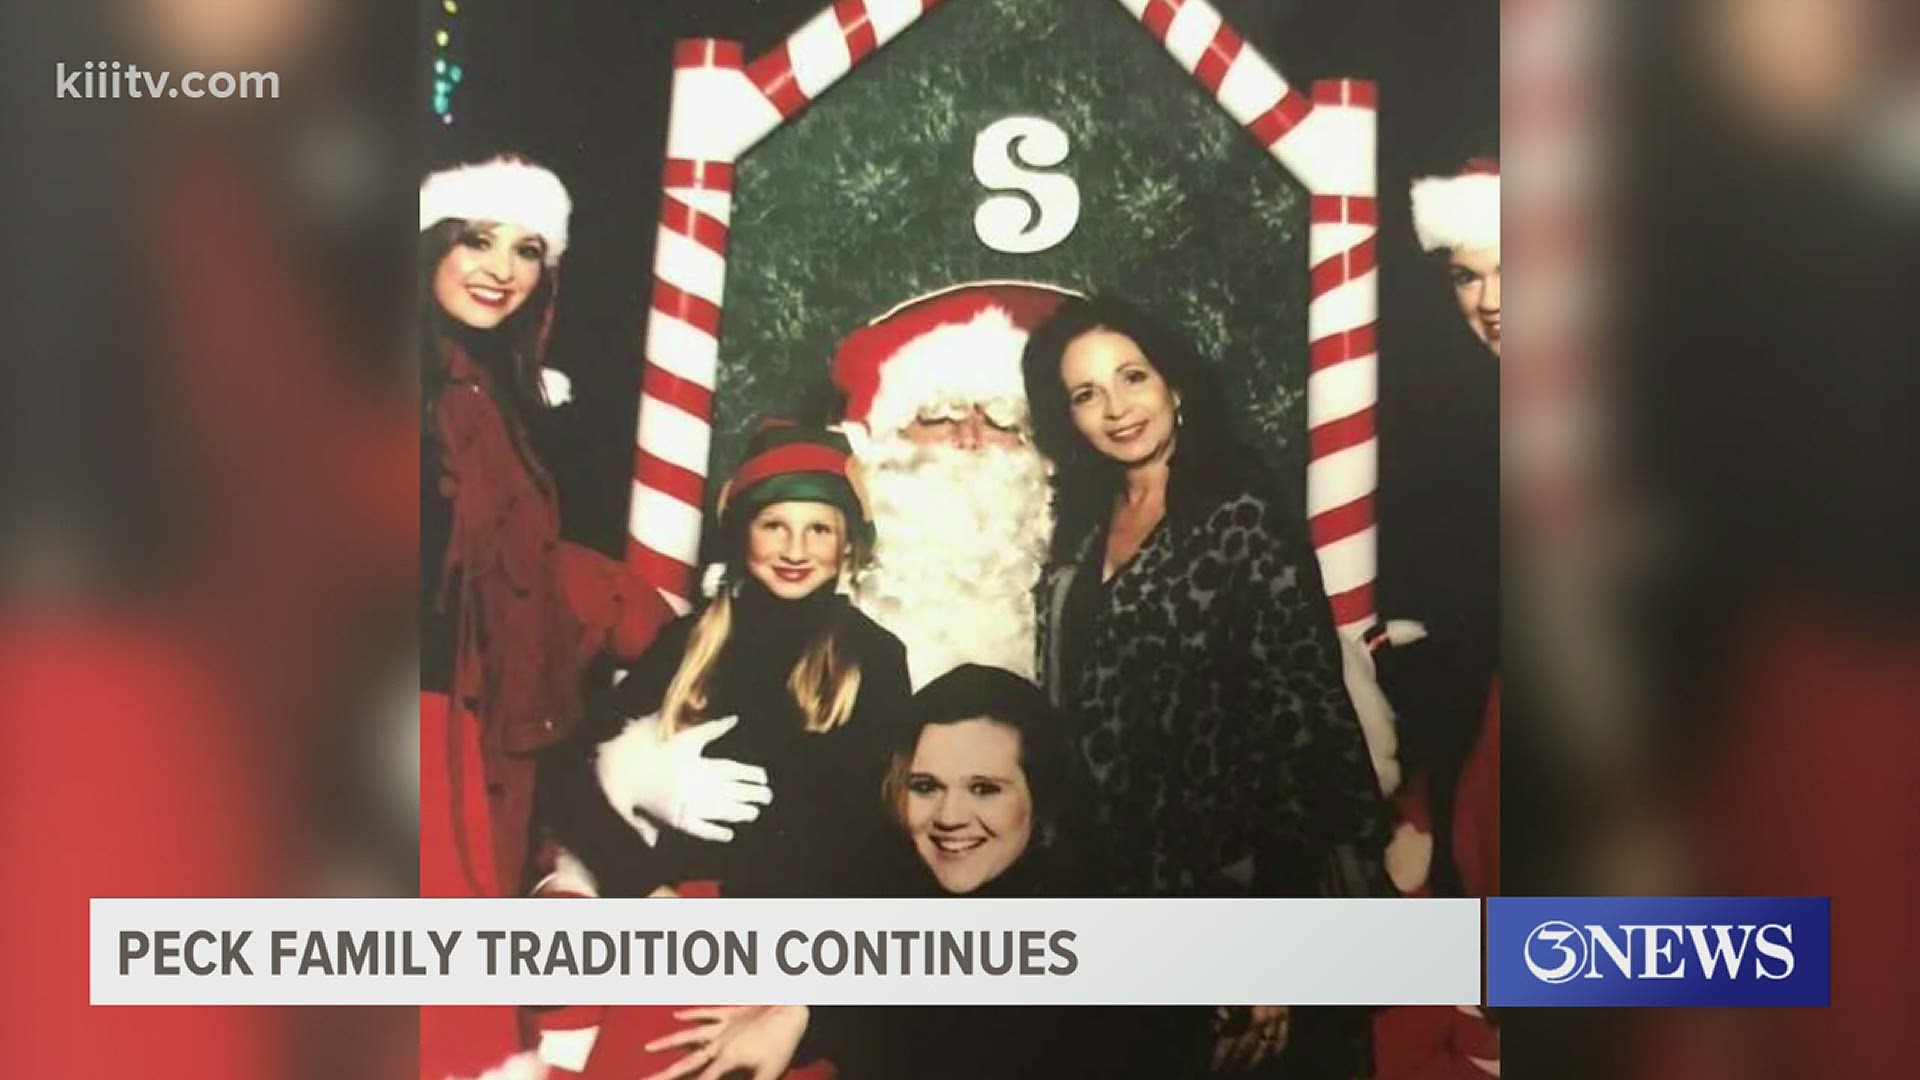 The Peck family has continued their tradition of giving back during the holidays for 47 years.